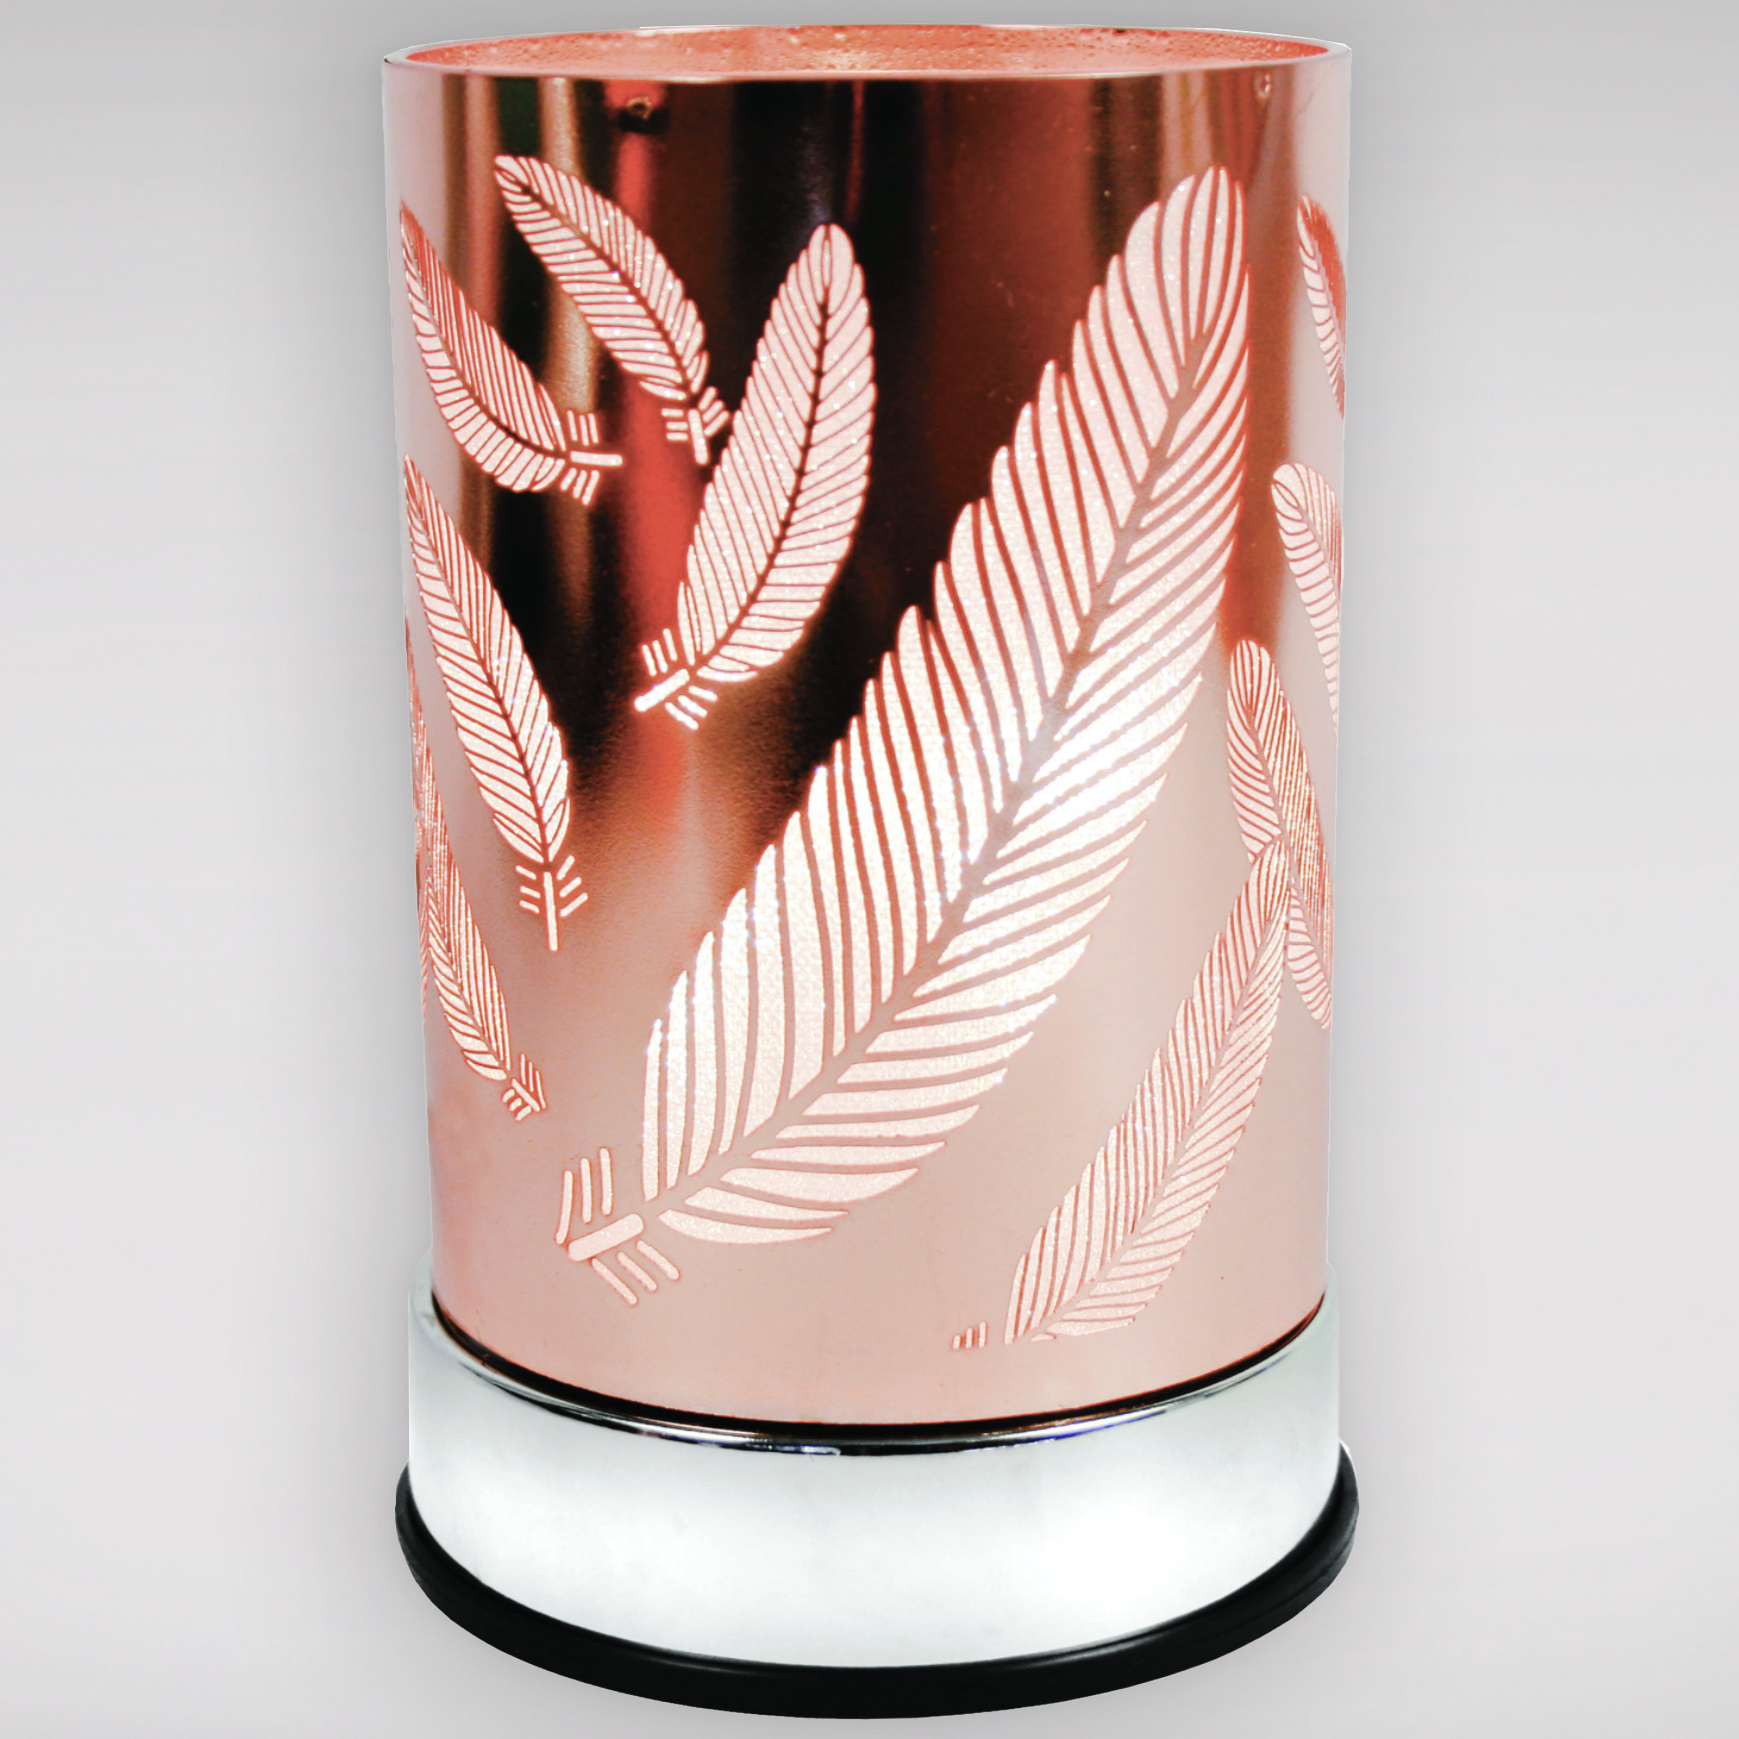 Scentchips Touch Lamp Warmer 'Feather' Display